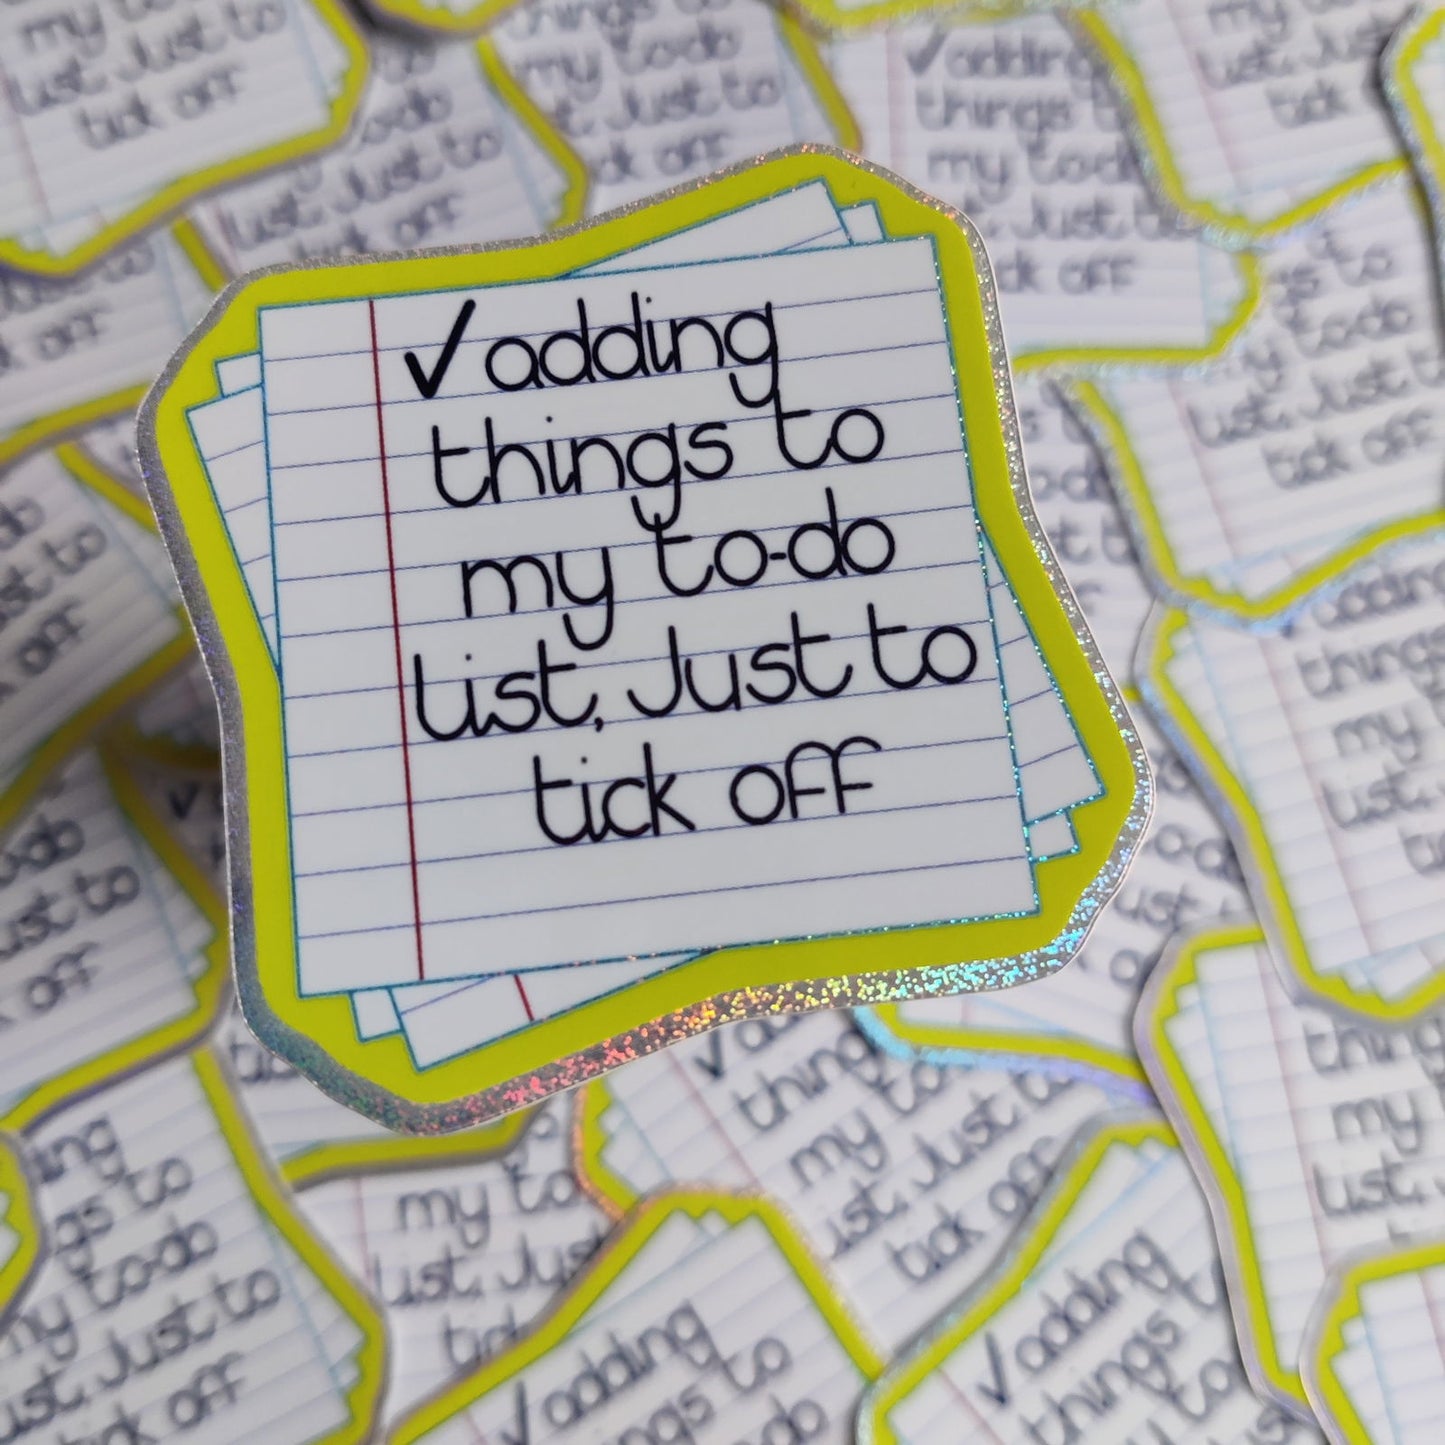 Adding things to me todo list, just to tick off Vinyl Sticker - Fay Dixon Design